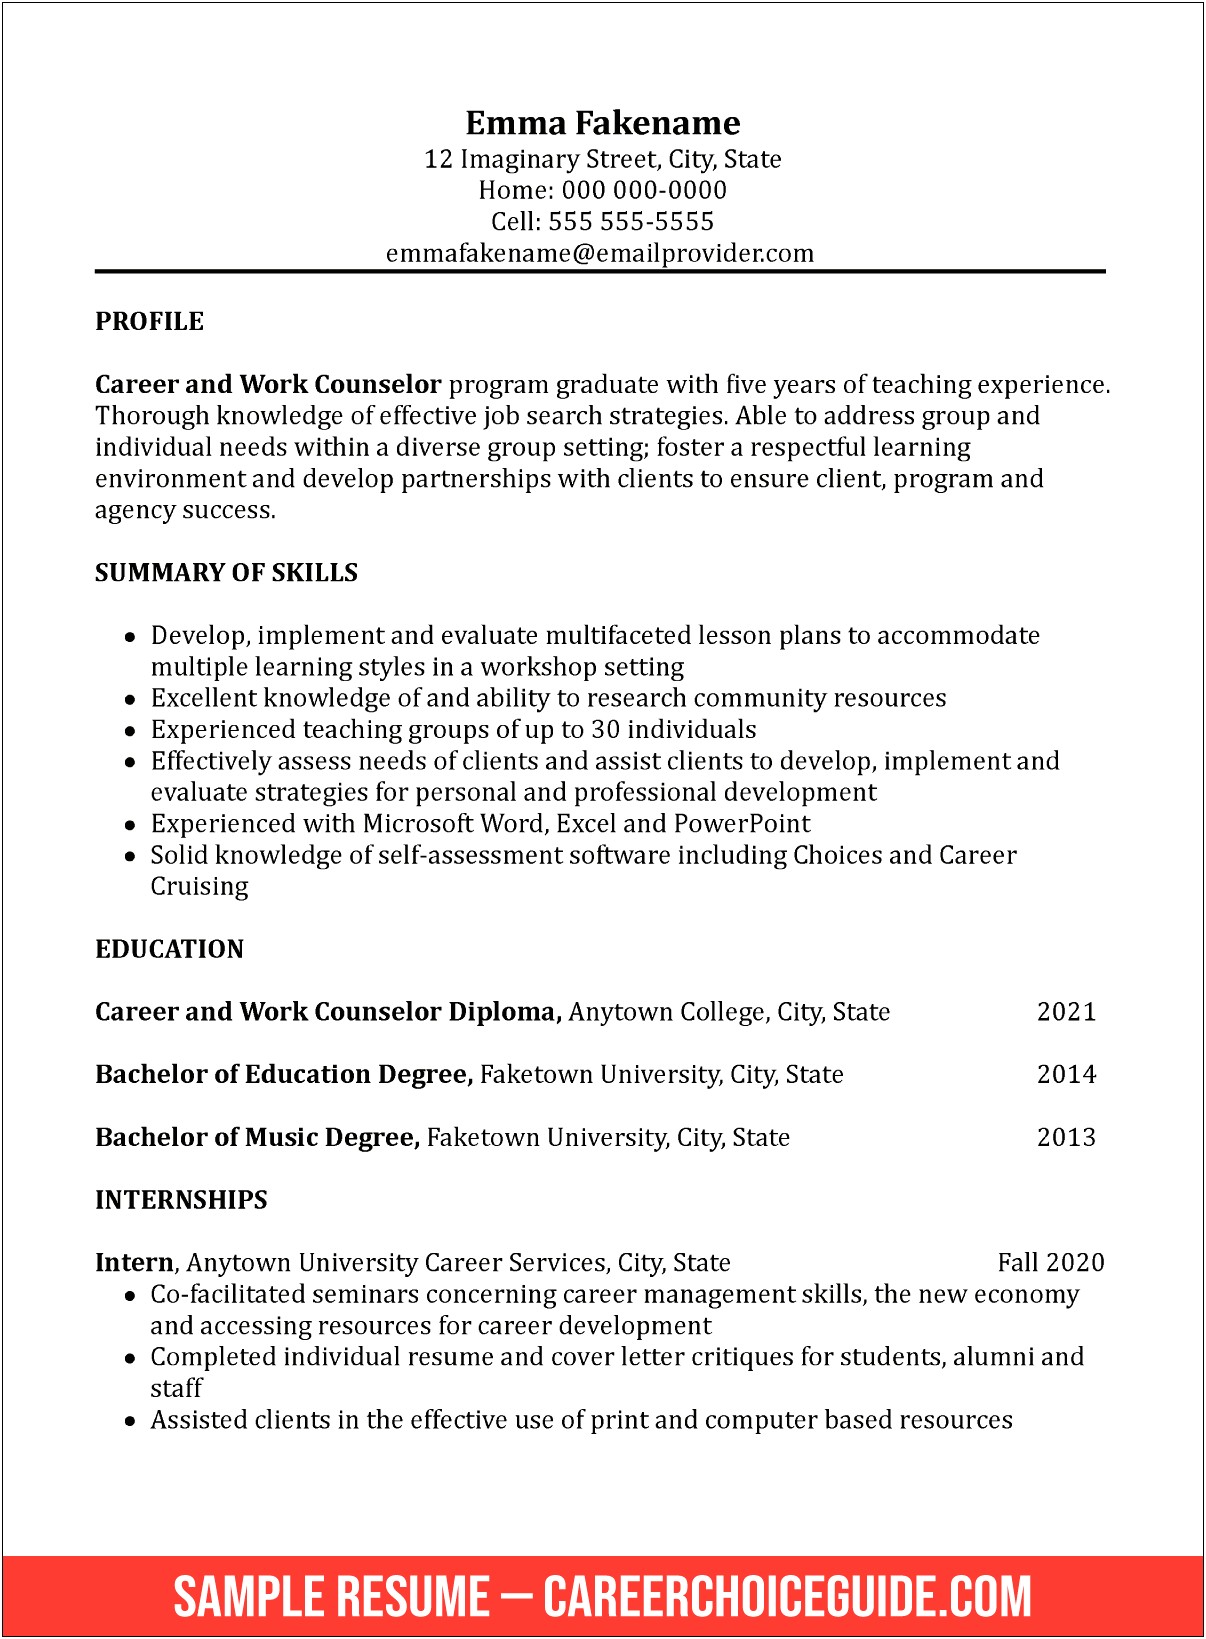 Sample Resume For Teaching Job With Experience